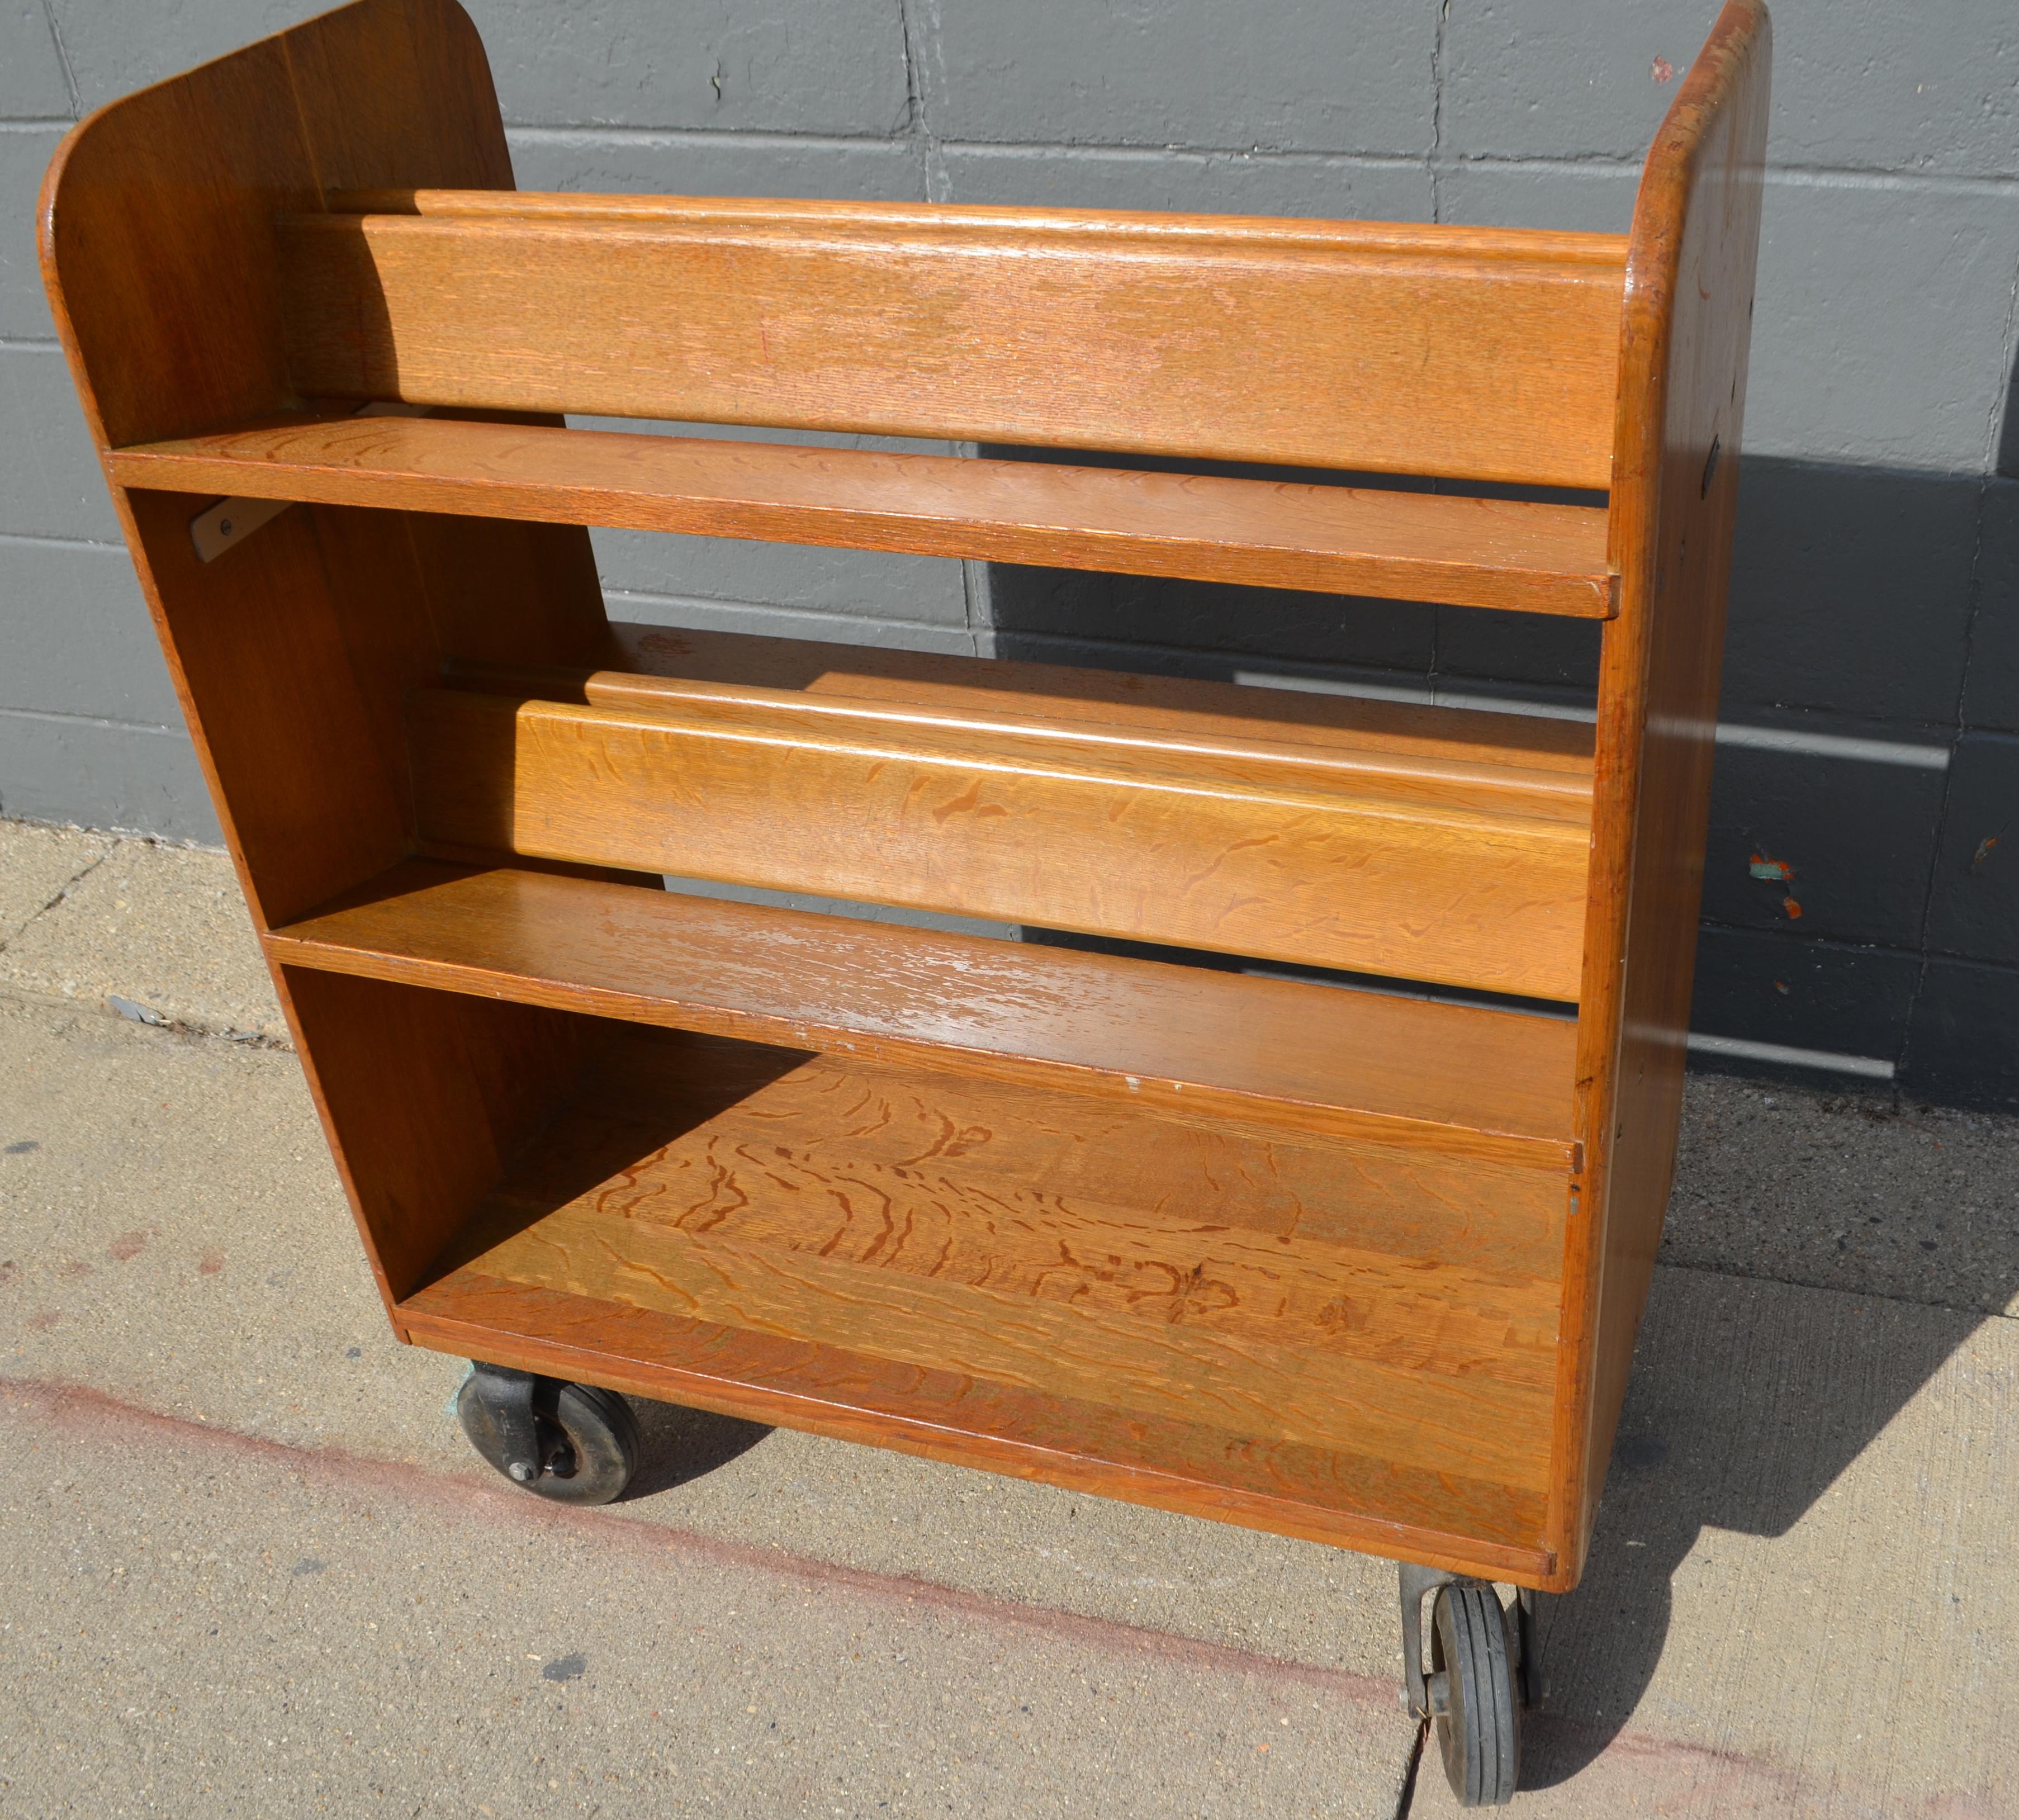 American Midcentury Oak Book Cart with slanted Shelves on Wheels from Public Library